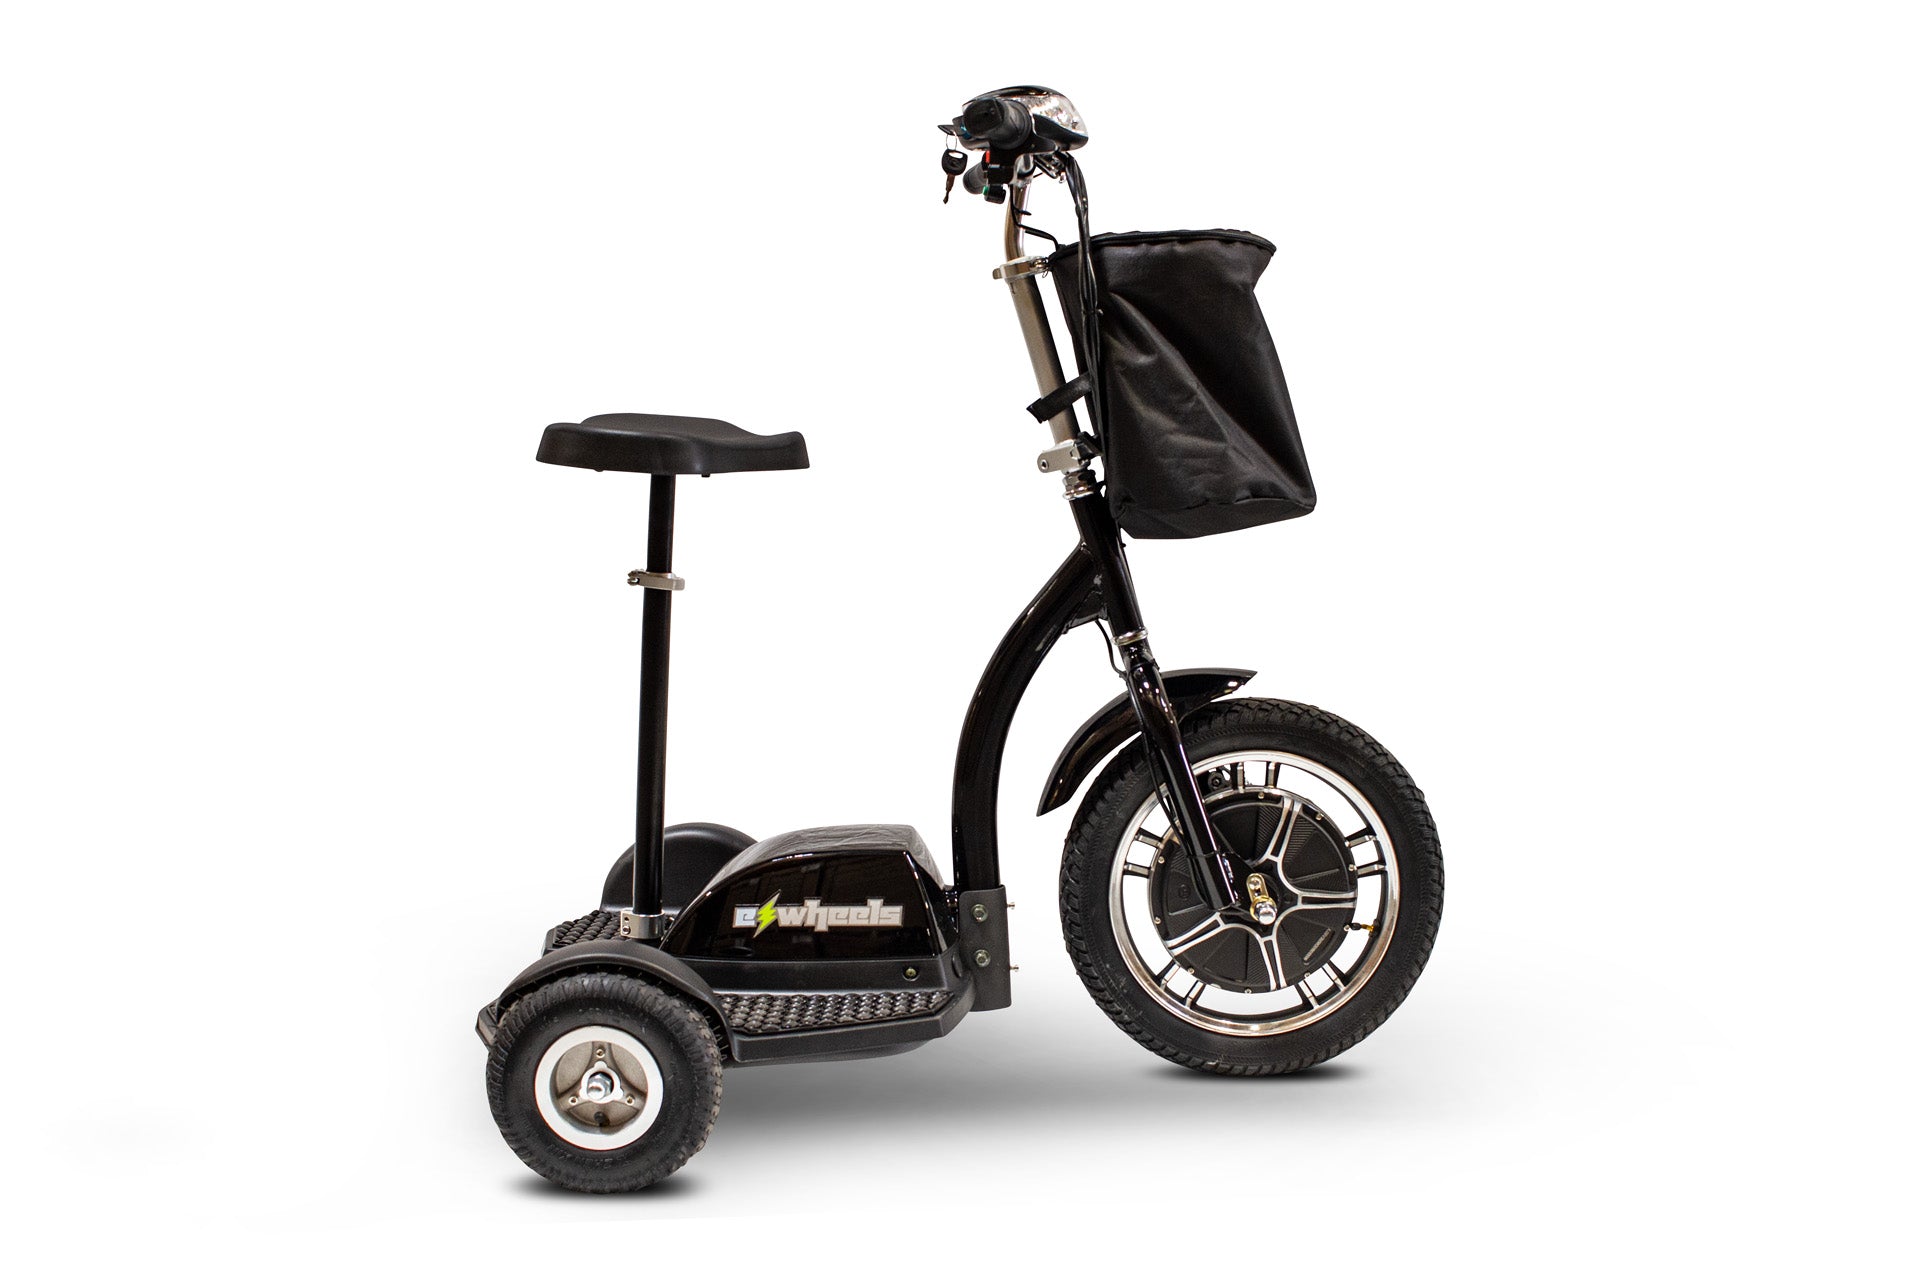 EW-18 Stand and Ride 3 Wheels Mobility Scooter